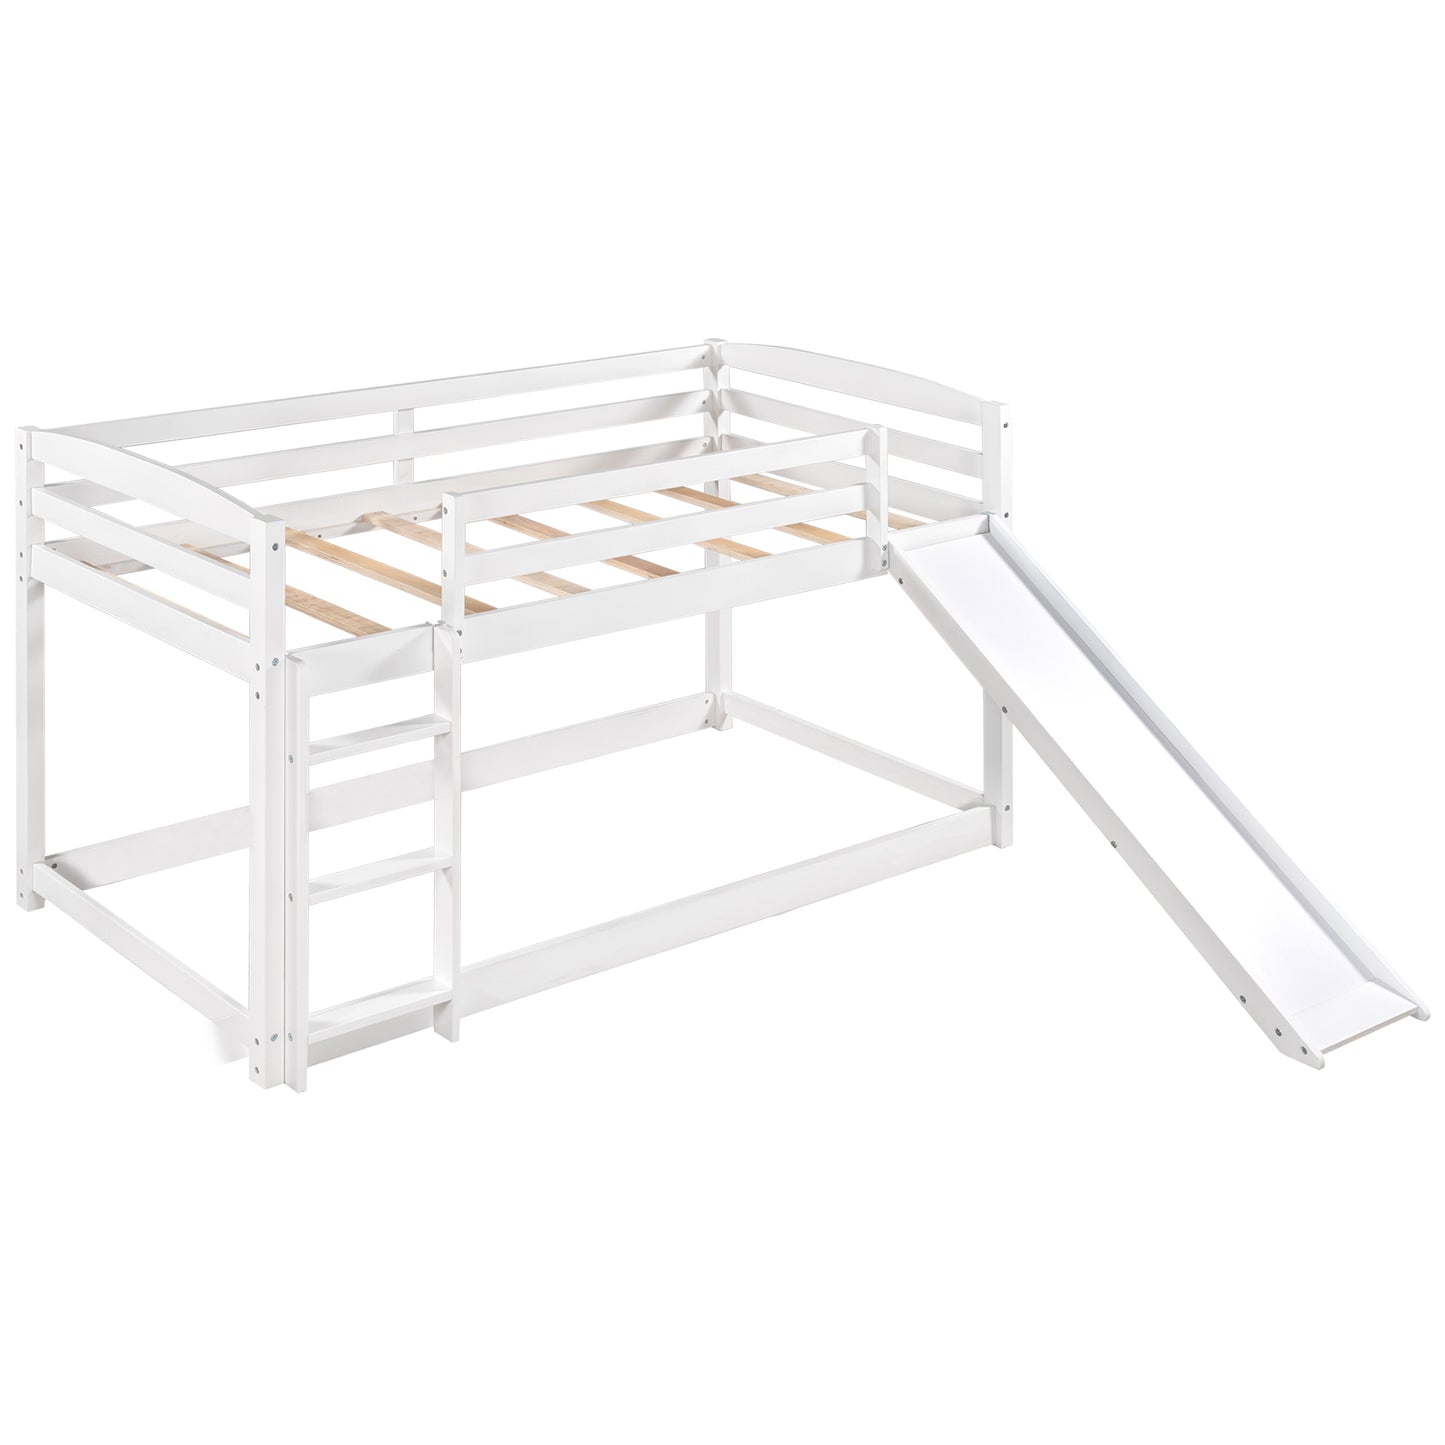 White Twin Bunk Beds with Slide for Kids, Low Profile Bunk Beds with Built-in Ladder, Kids Bedroom Furniture Floor Bed Frame for Toddlers Boys Girls, No Box Spring Needed, Hold 400LBS